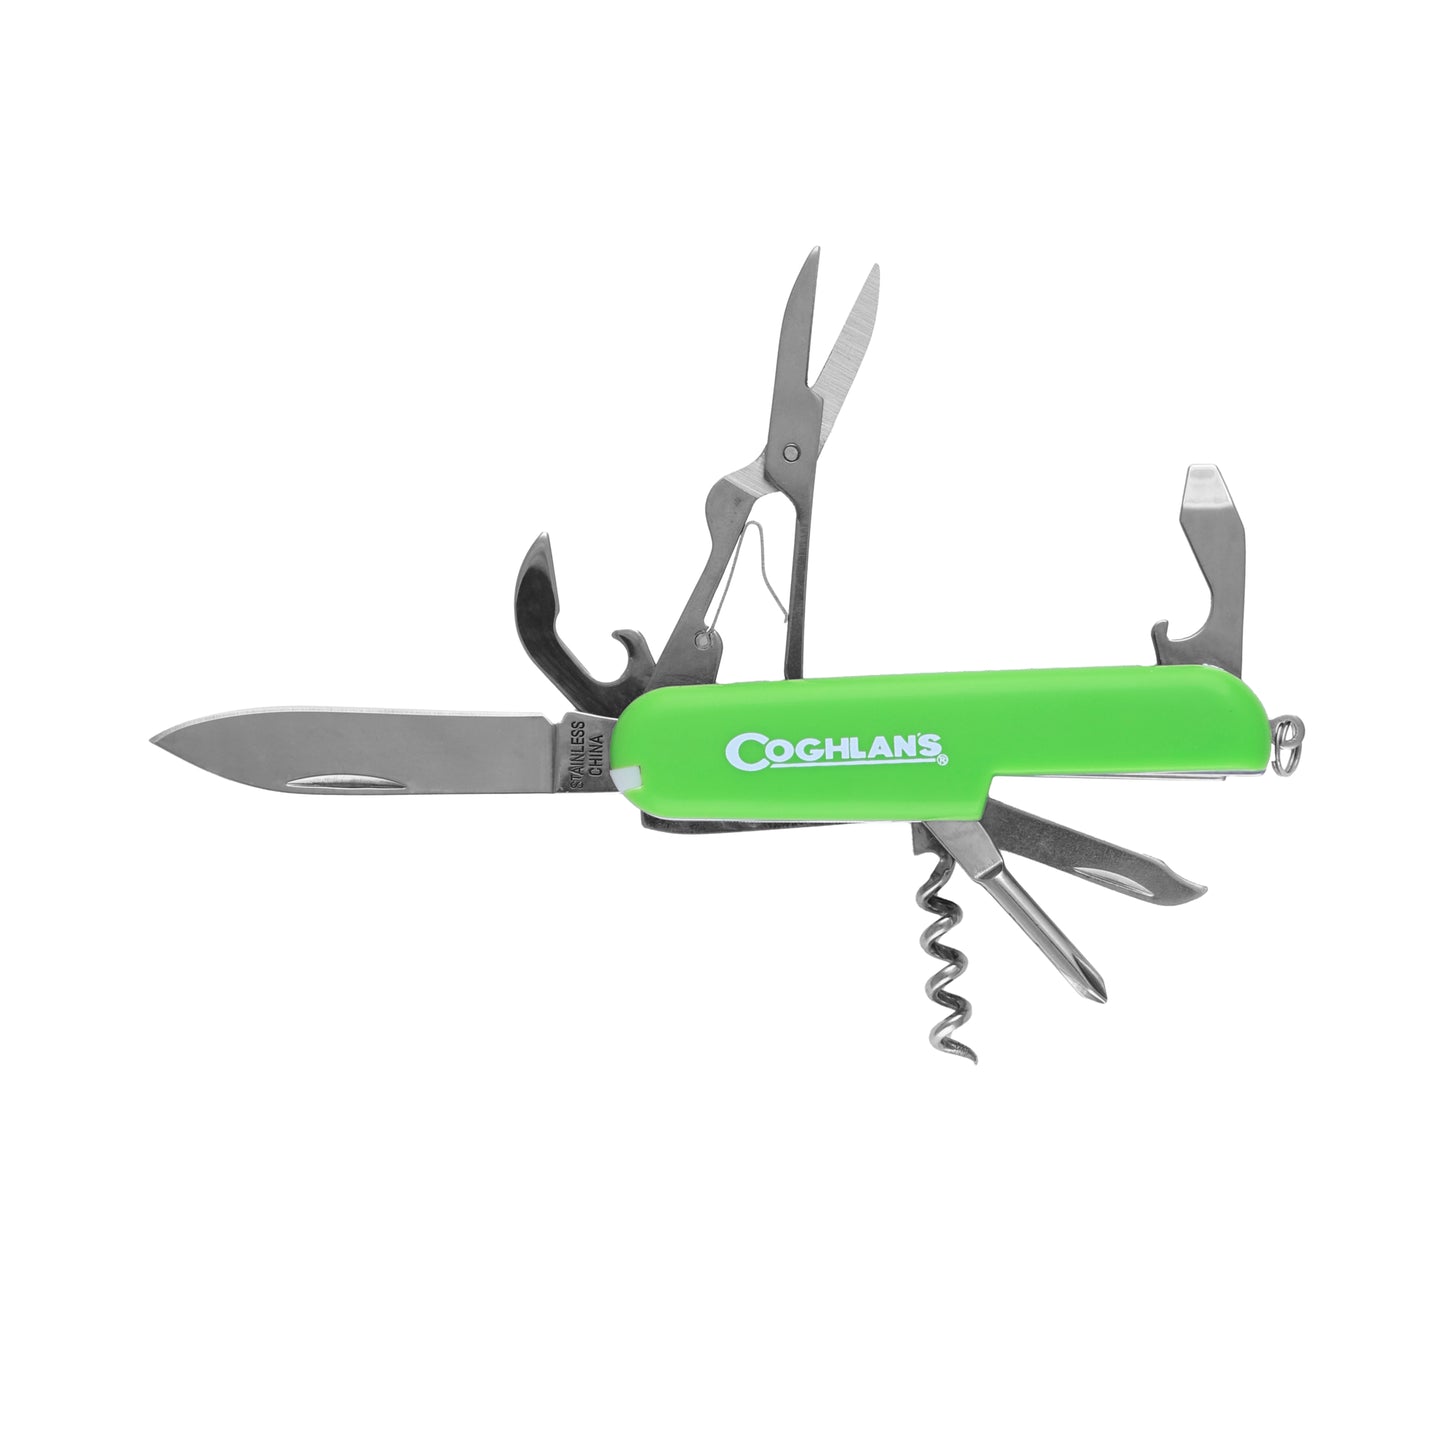 Camp Knife - 11 Function